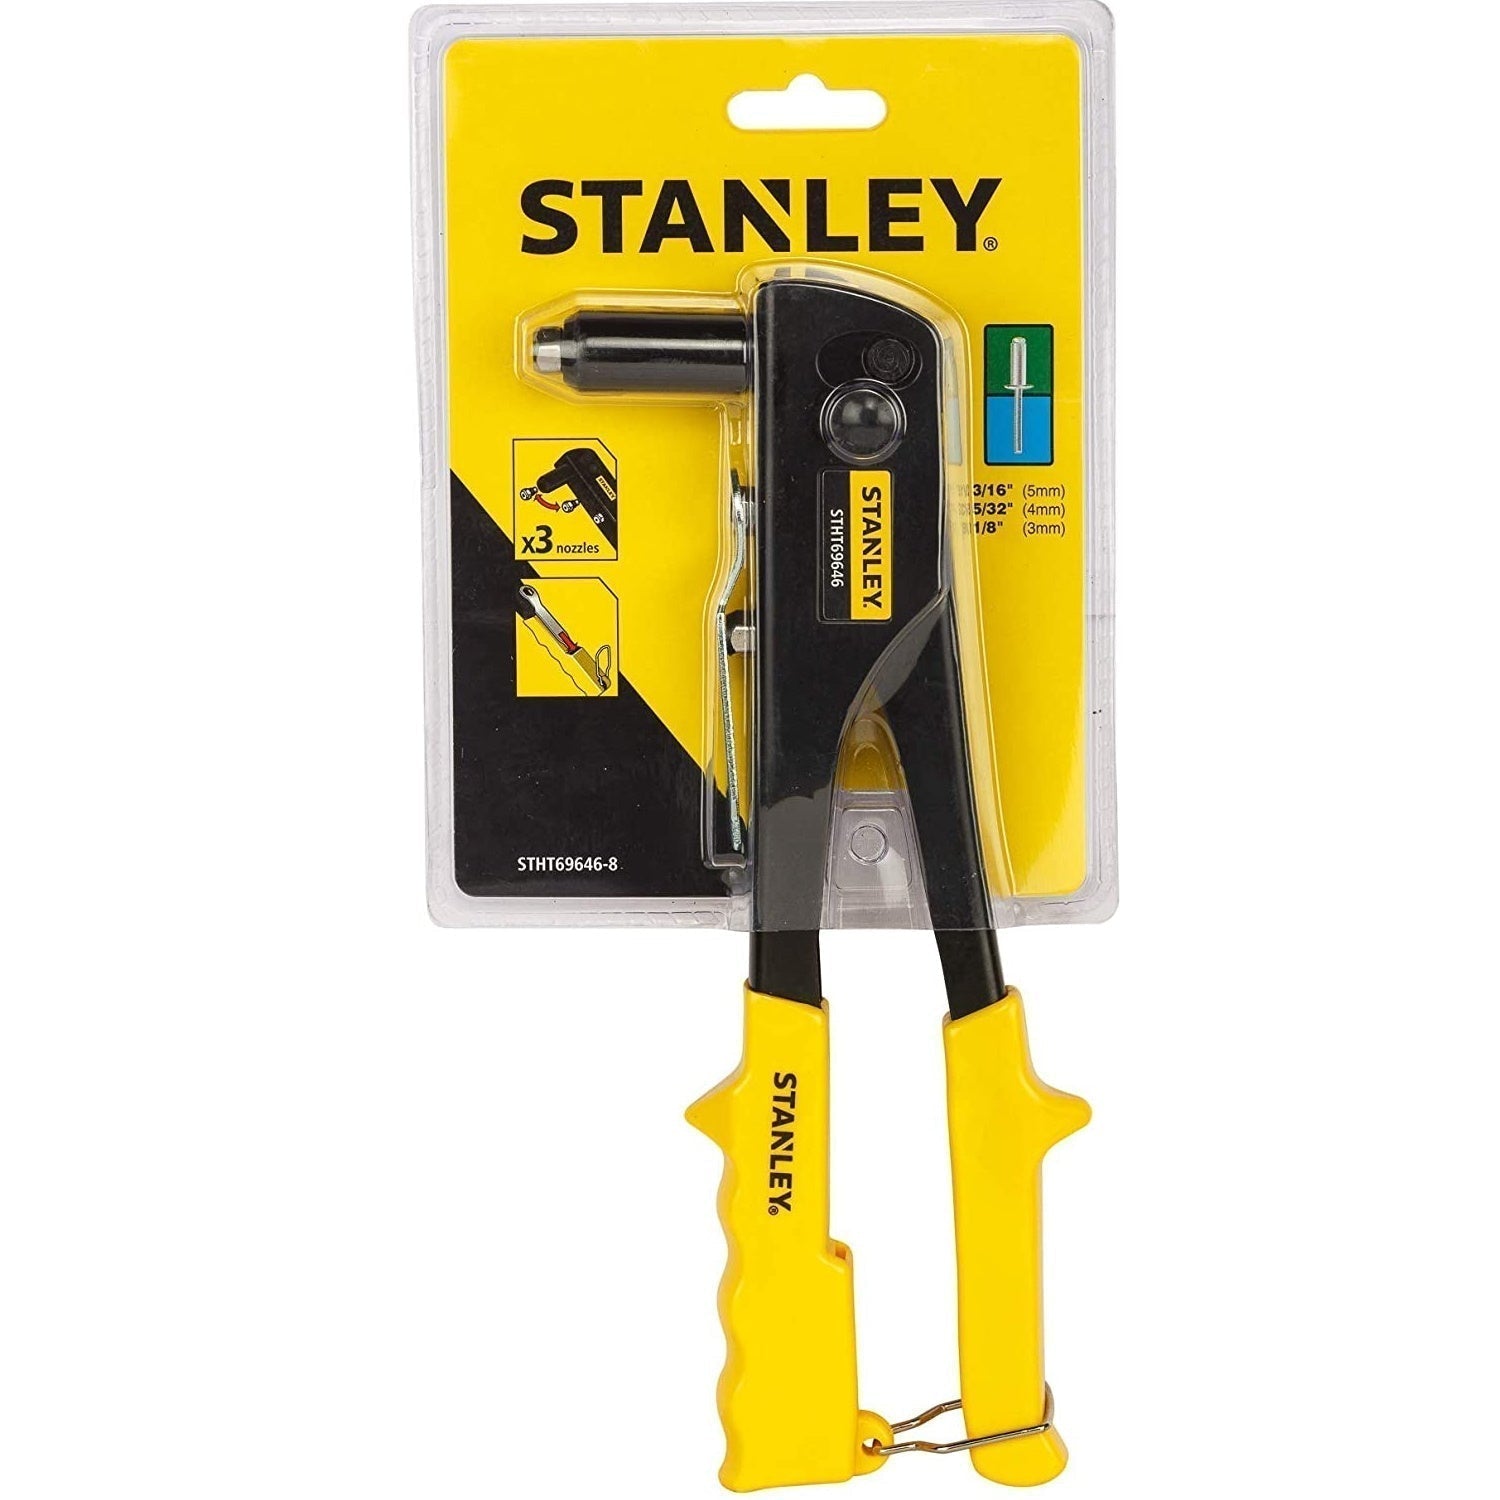 Stanley Medium Duty Riveter 3 Nozzle STHT69646-8 Power Tool Services